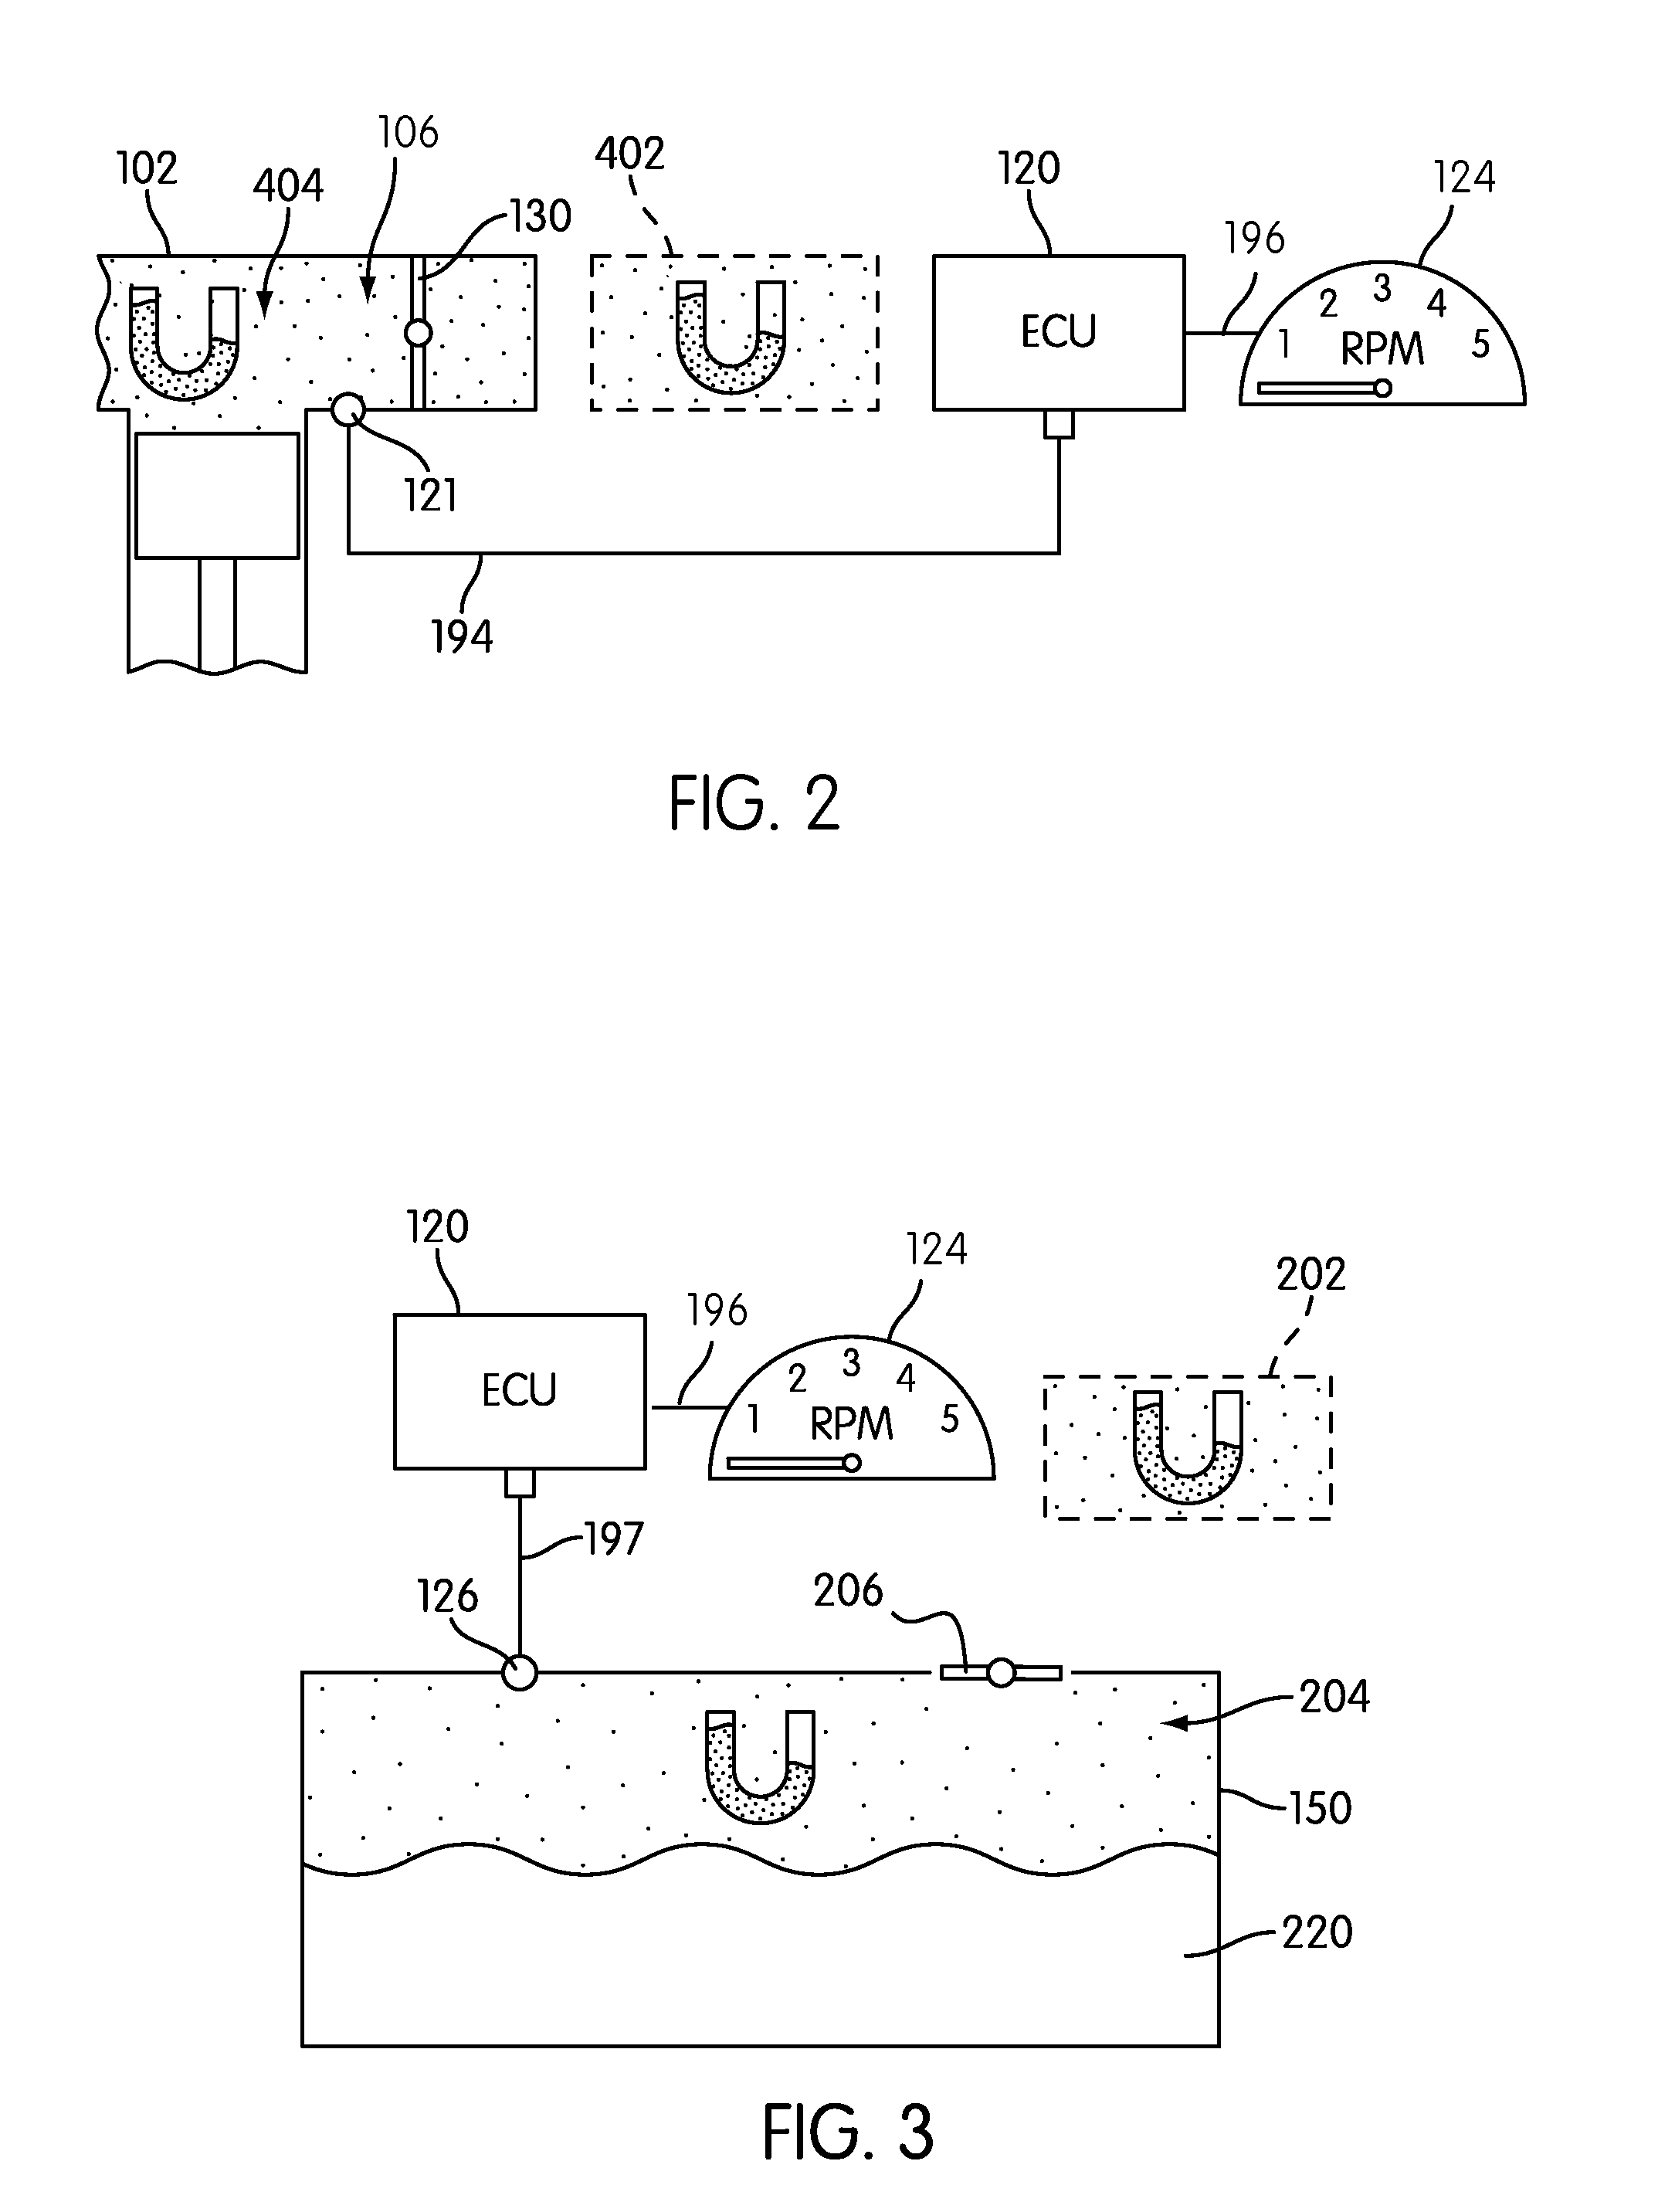 Method of Determining Ambient Pressure for Fuel Injection